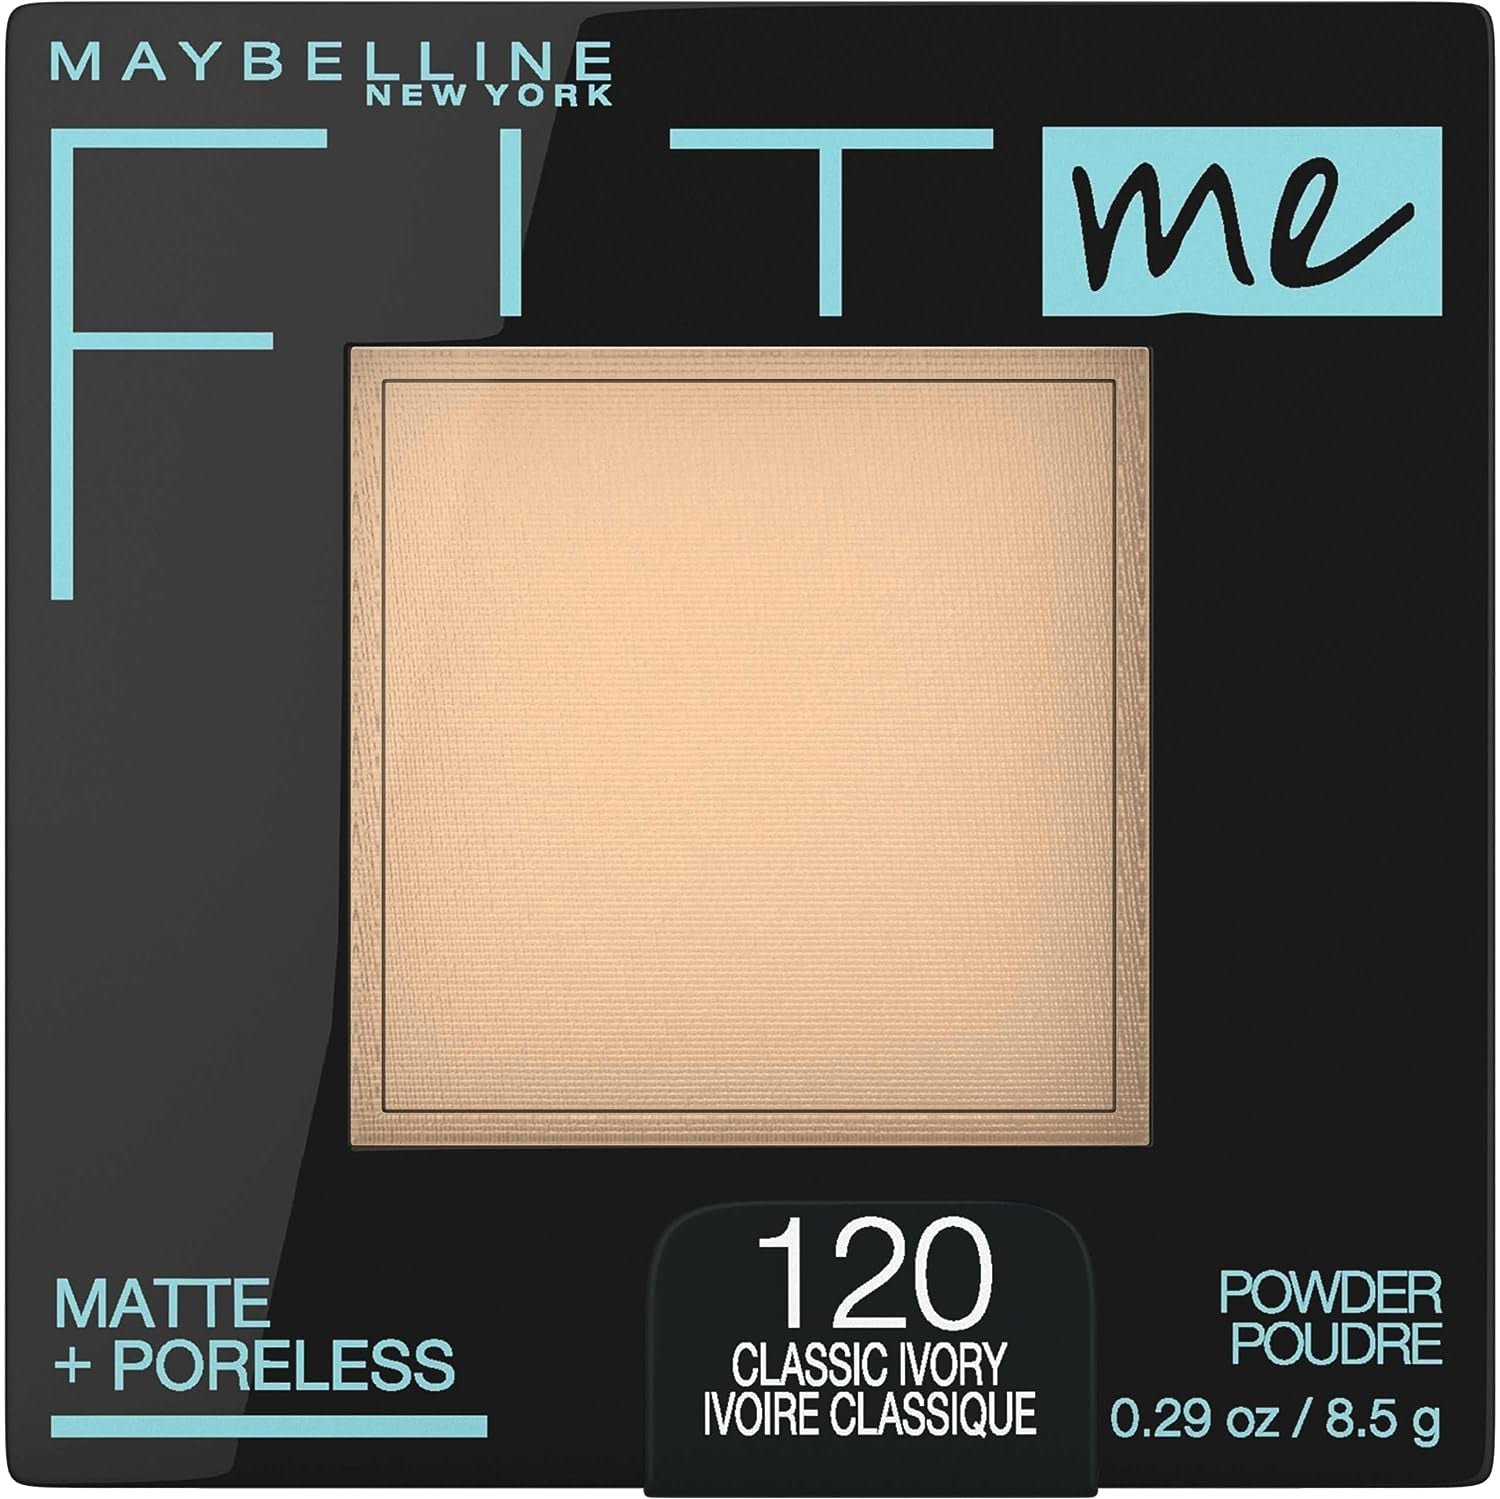 Fit Me Matte + Poreless Pressed Face Powder Makeup & Setting Powder, Classic Ivory, 1 Count